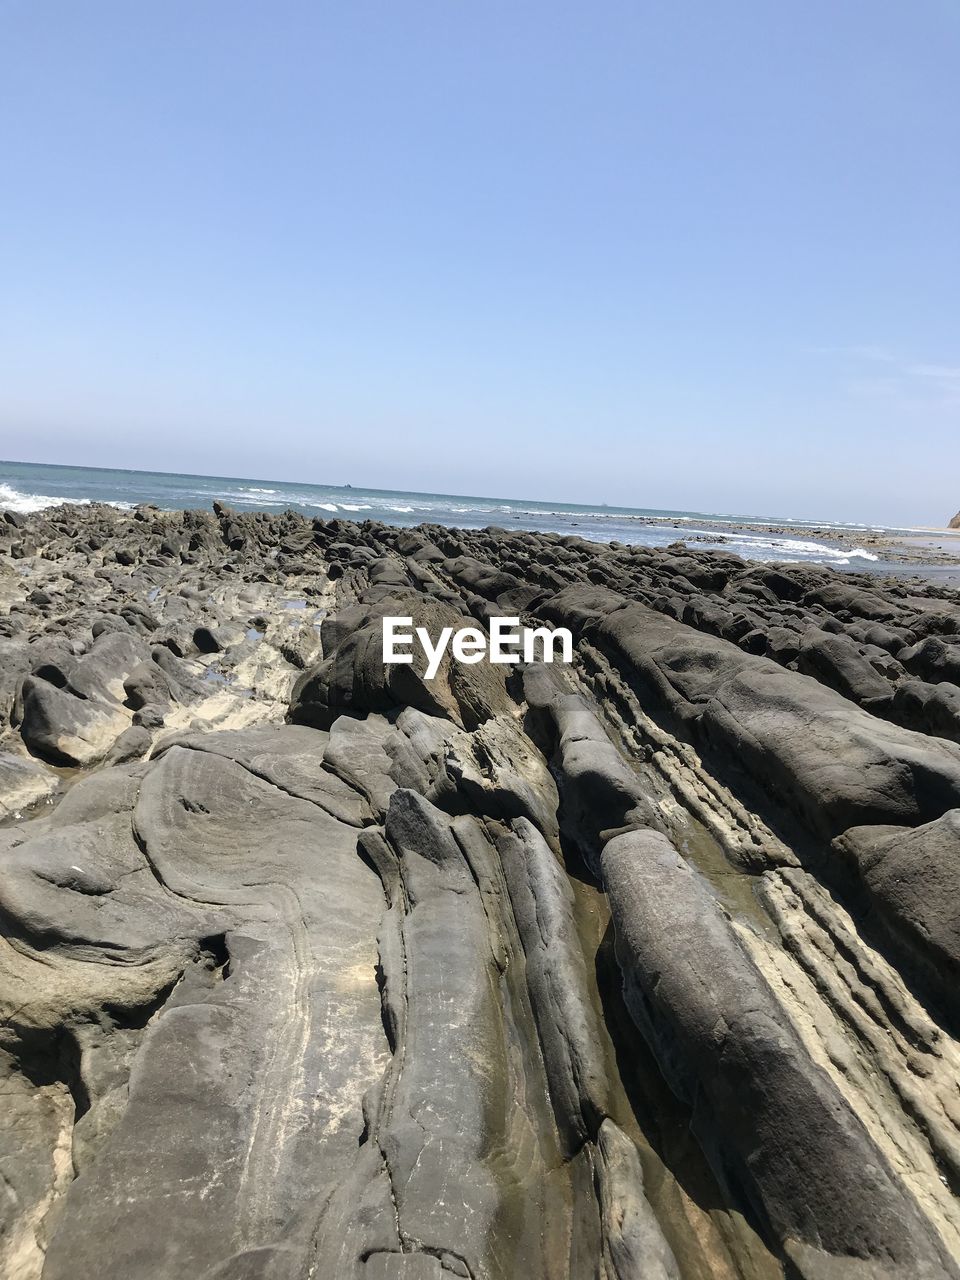 Panoramic view of rocks on beach against clear sky